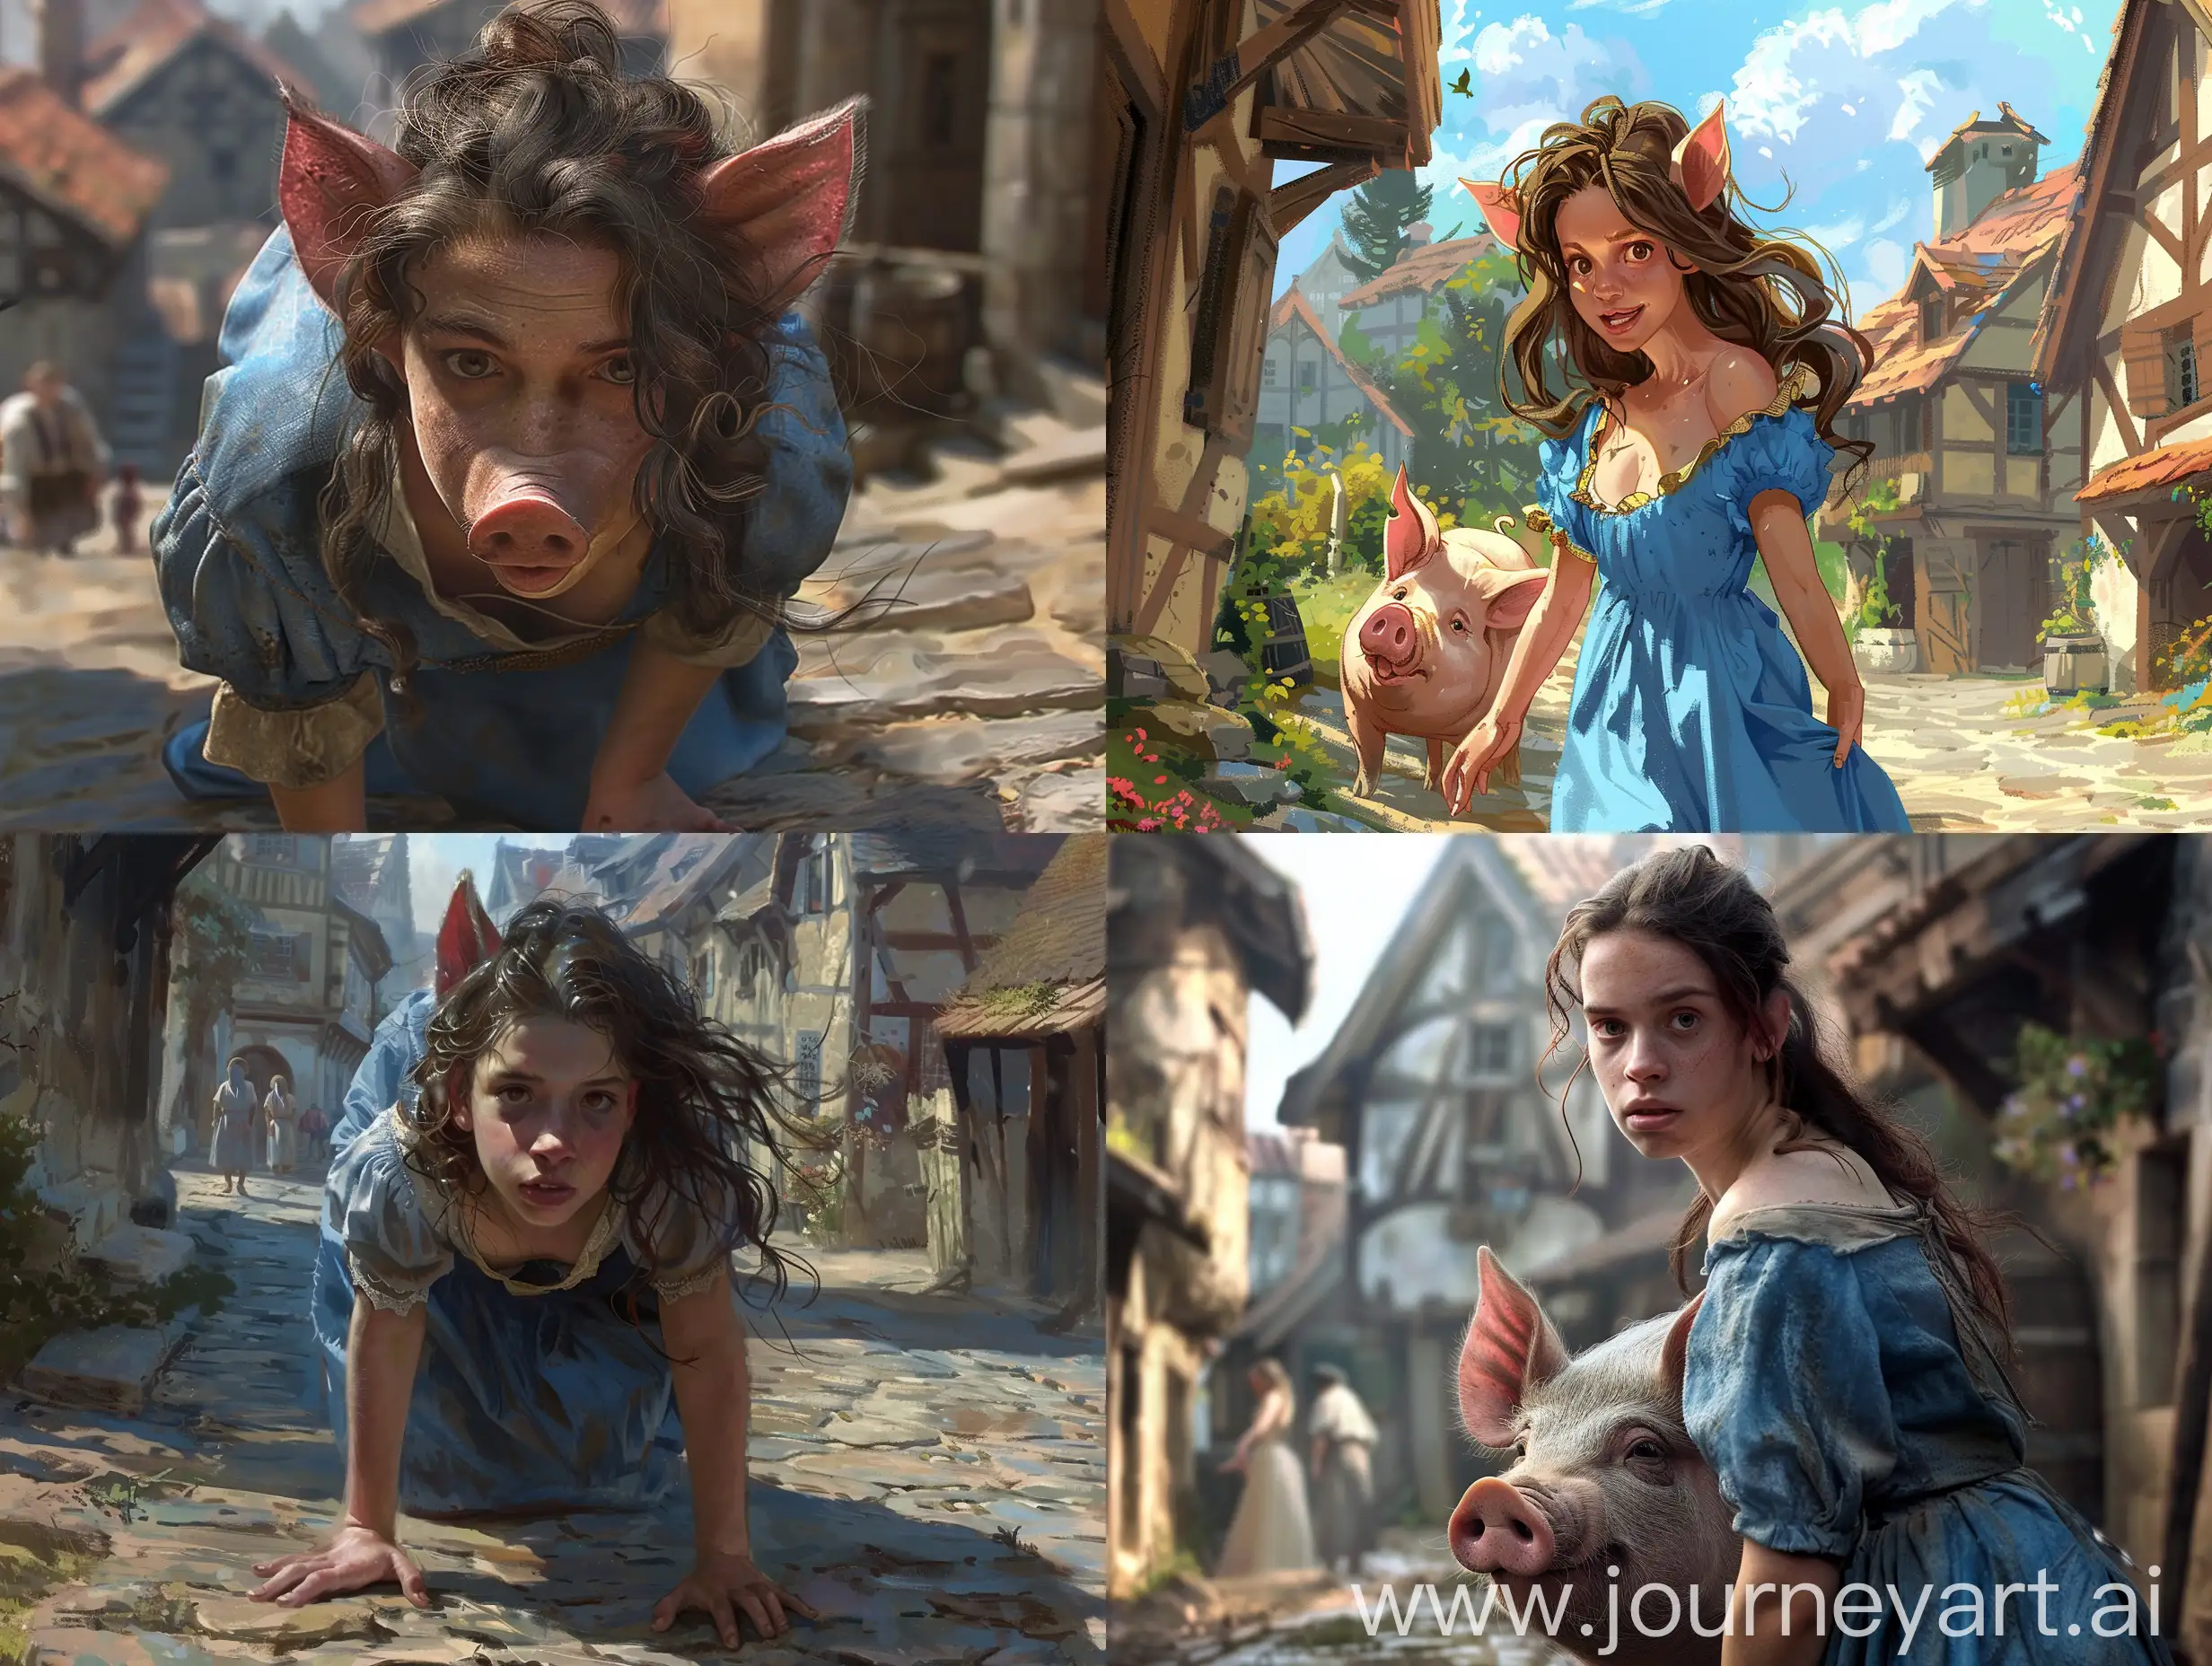 Young-Woman-Transformed-into-Pig-in-Village-at-Noon